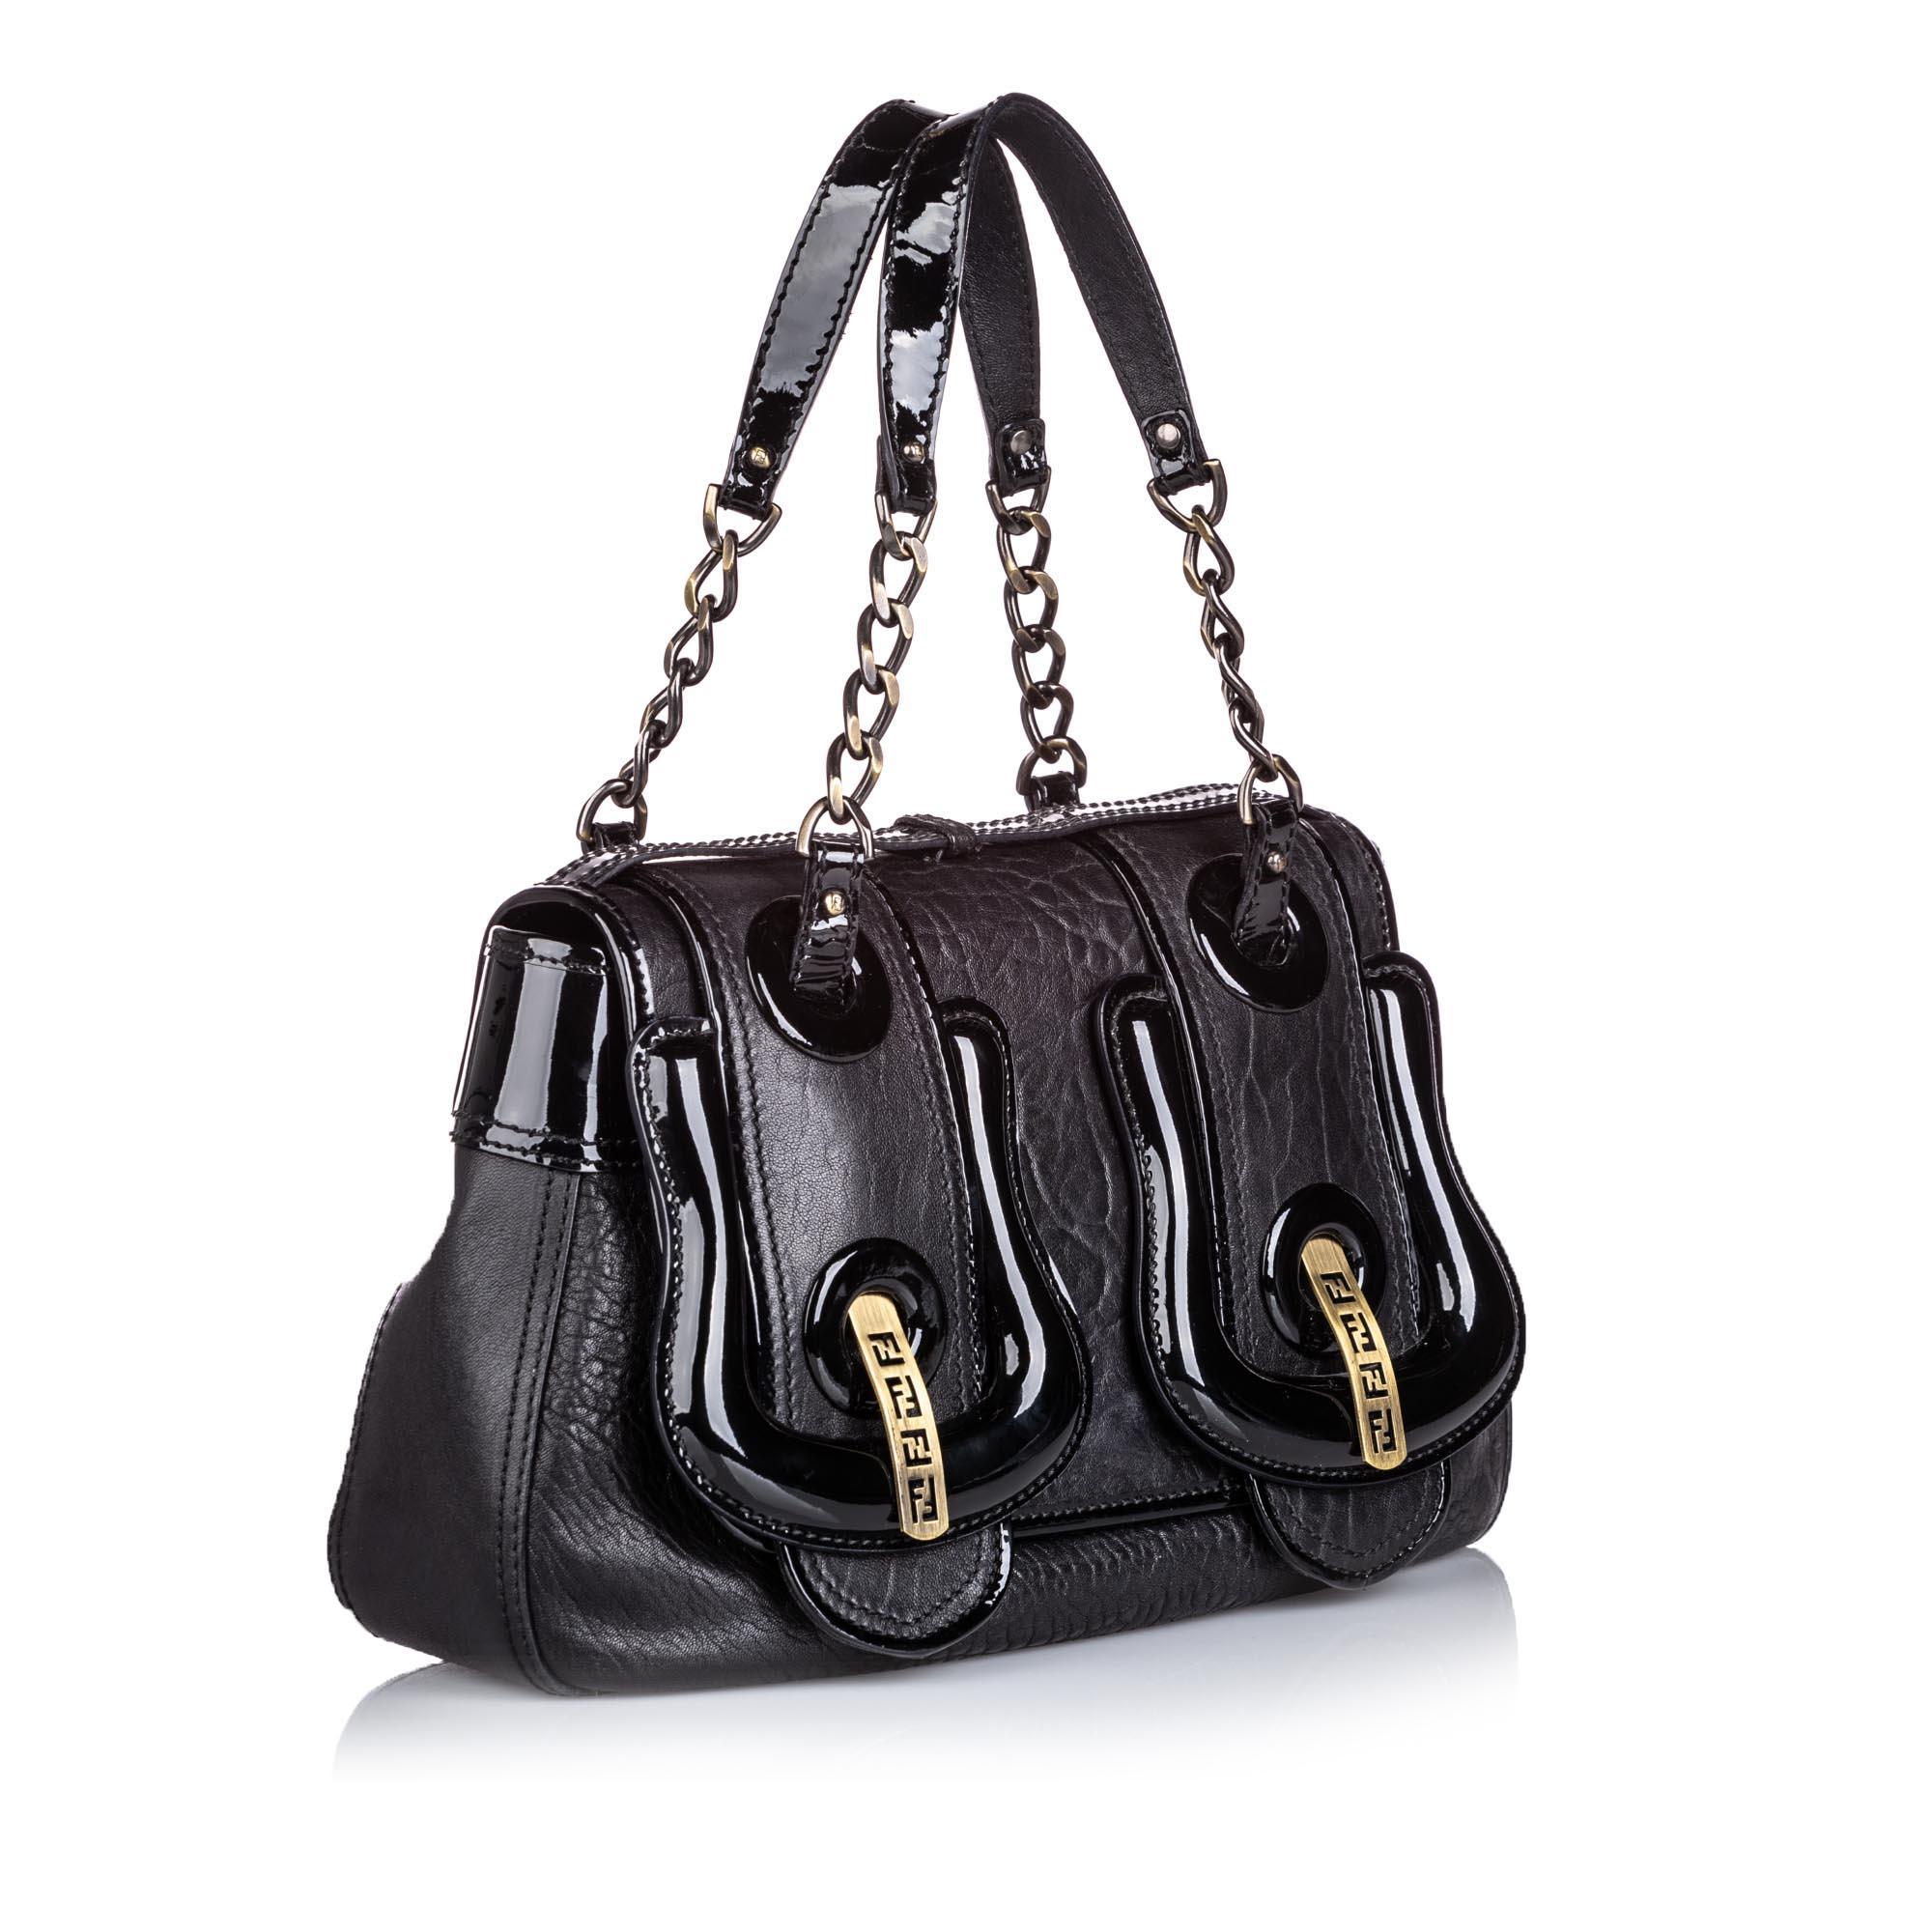 The B Bis handbag features a leather body with patent leather trim, a single chain-link strap with leather shoulder guard, fold-in front flap closure, and an interior slip pocket. It carries as AB condition rating.

Inclusions: 
Dust